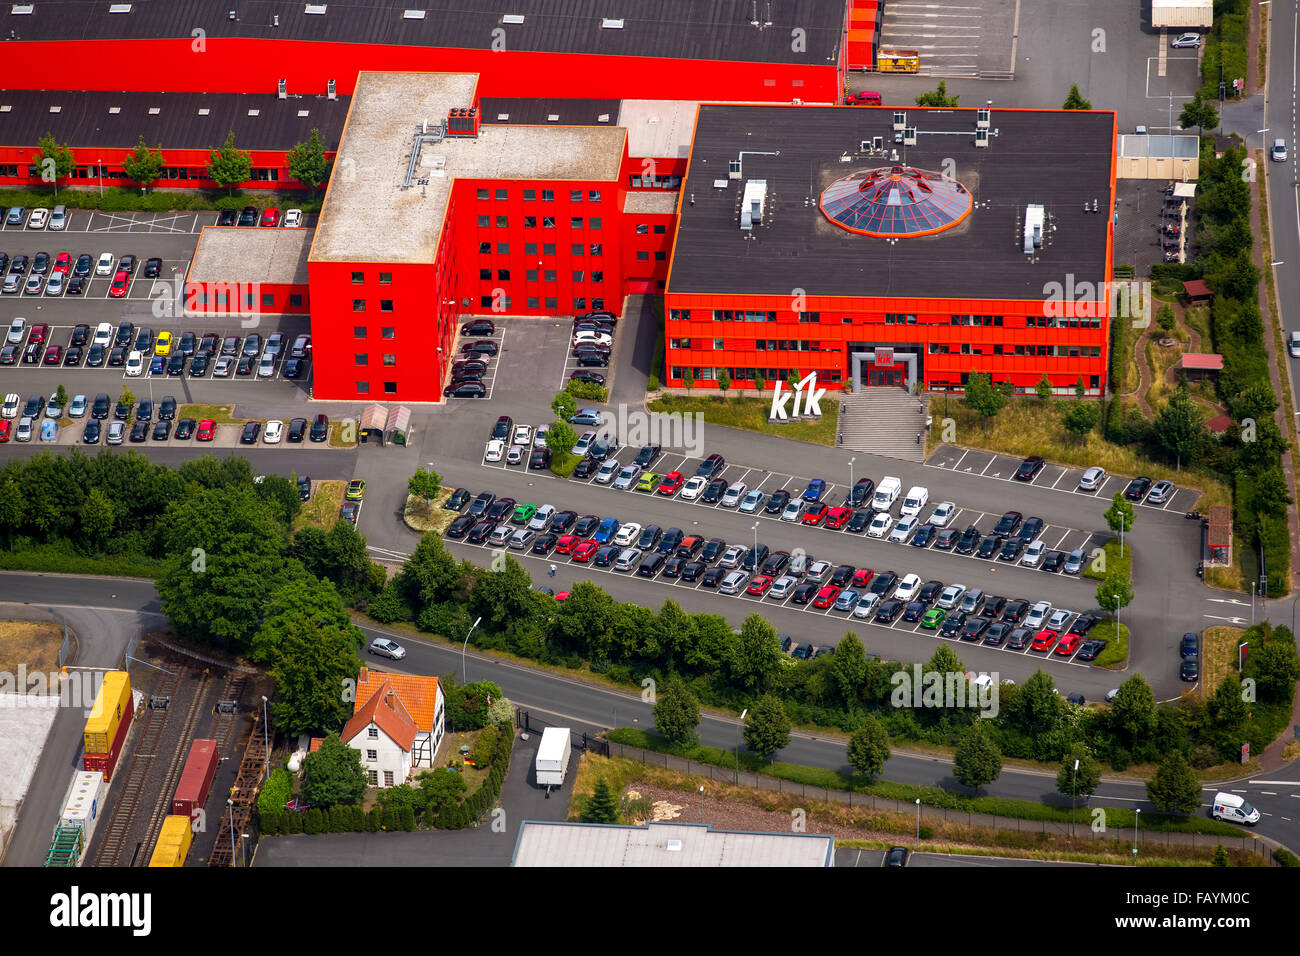 Aerial view, industrial area Siemensstraße with KIK and Woolworth on the A2, Bönen, Ruhr area, North Rhine-Westphalia, Germany, Stock Photo